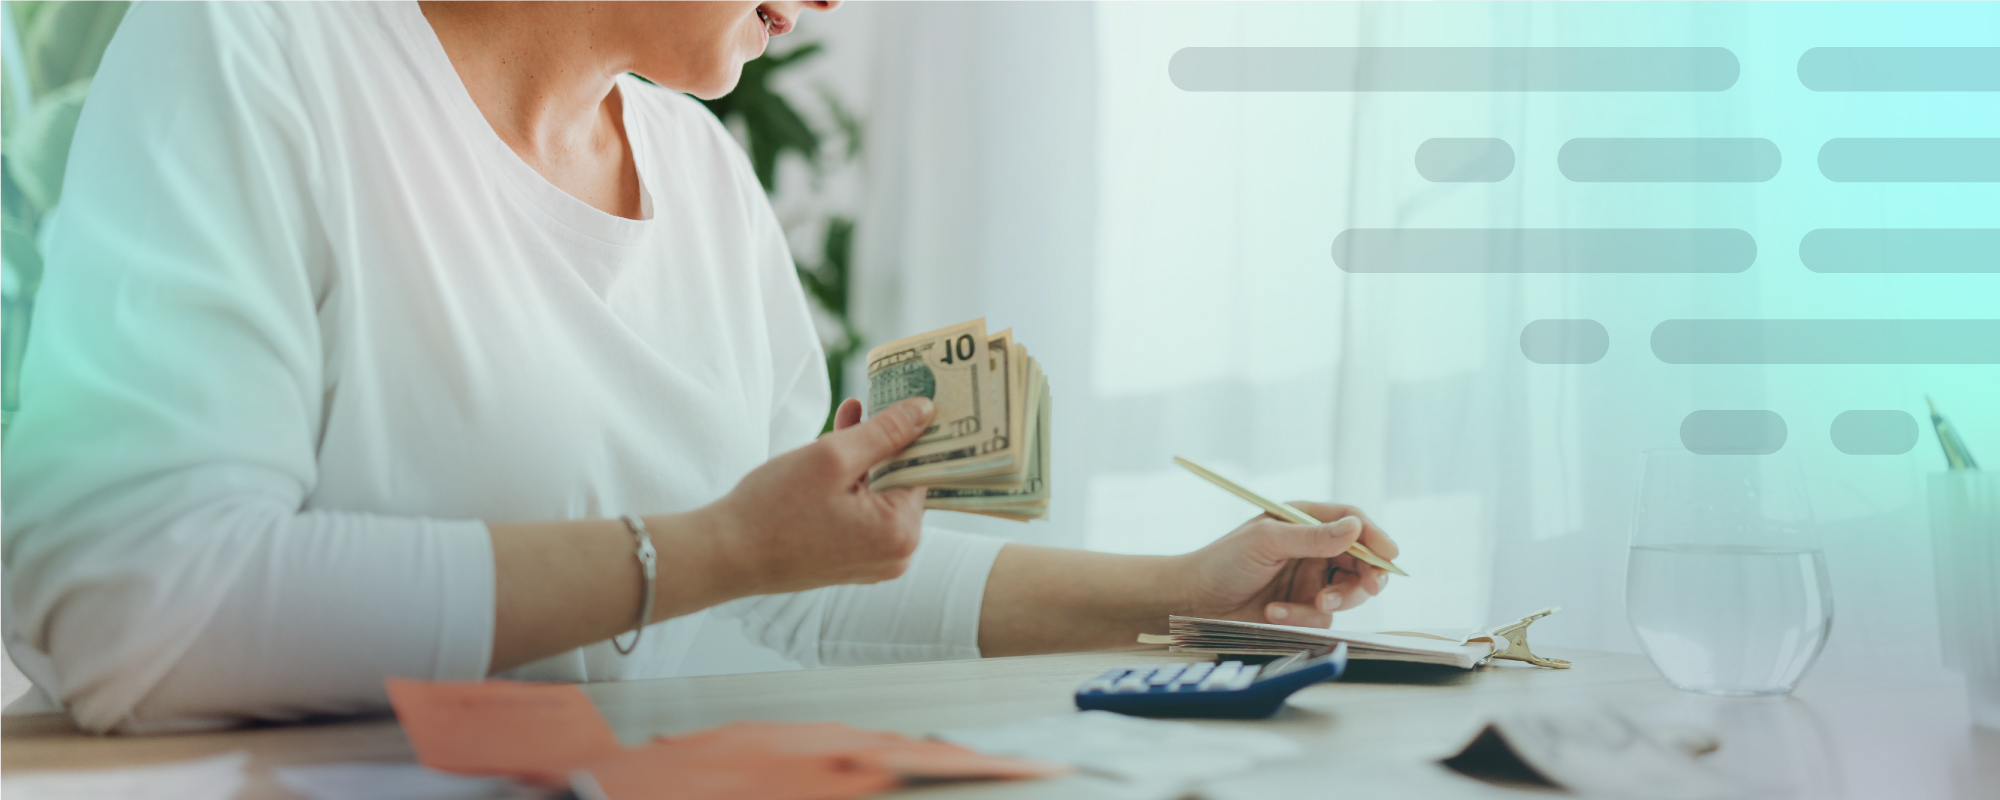 Woman at table with cash, calculator